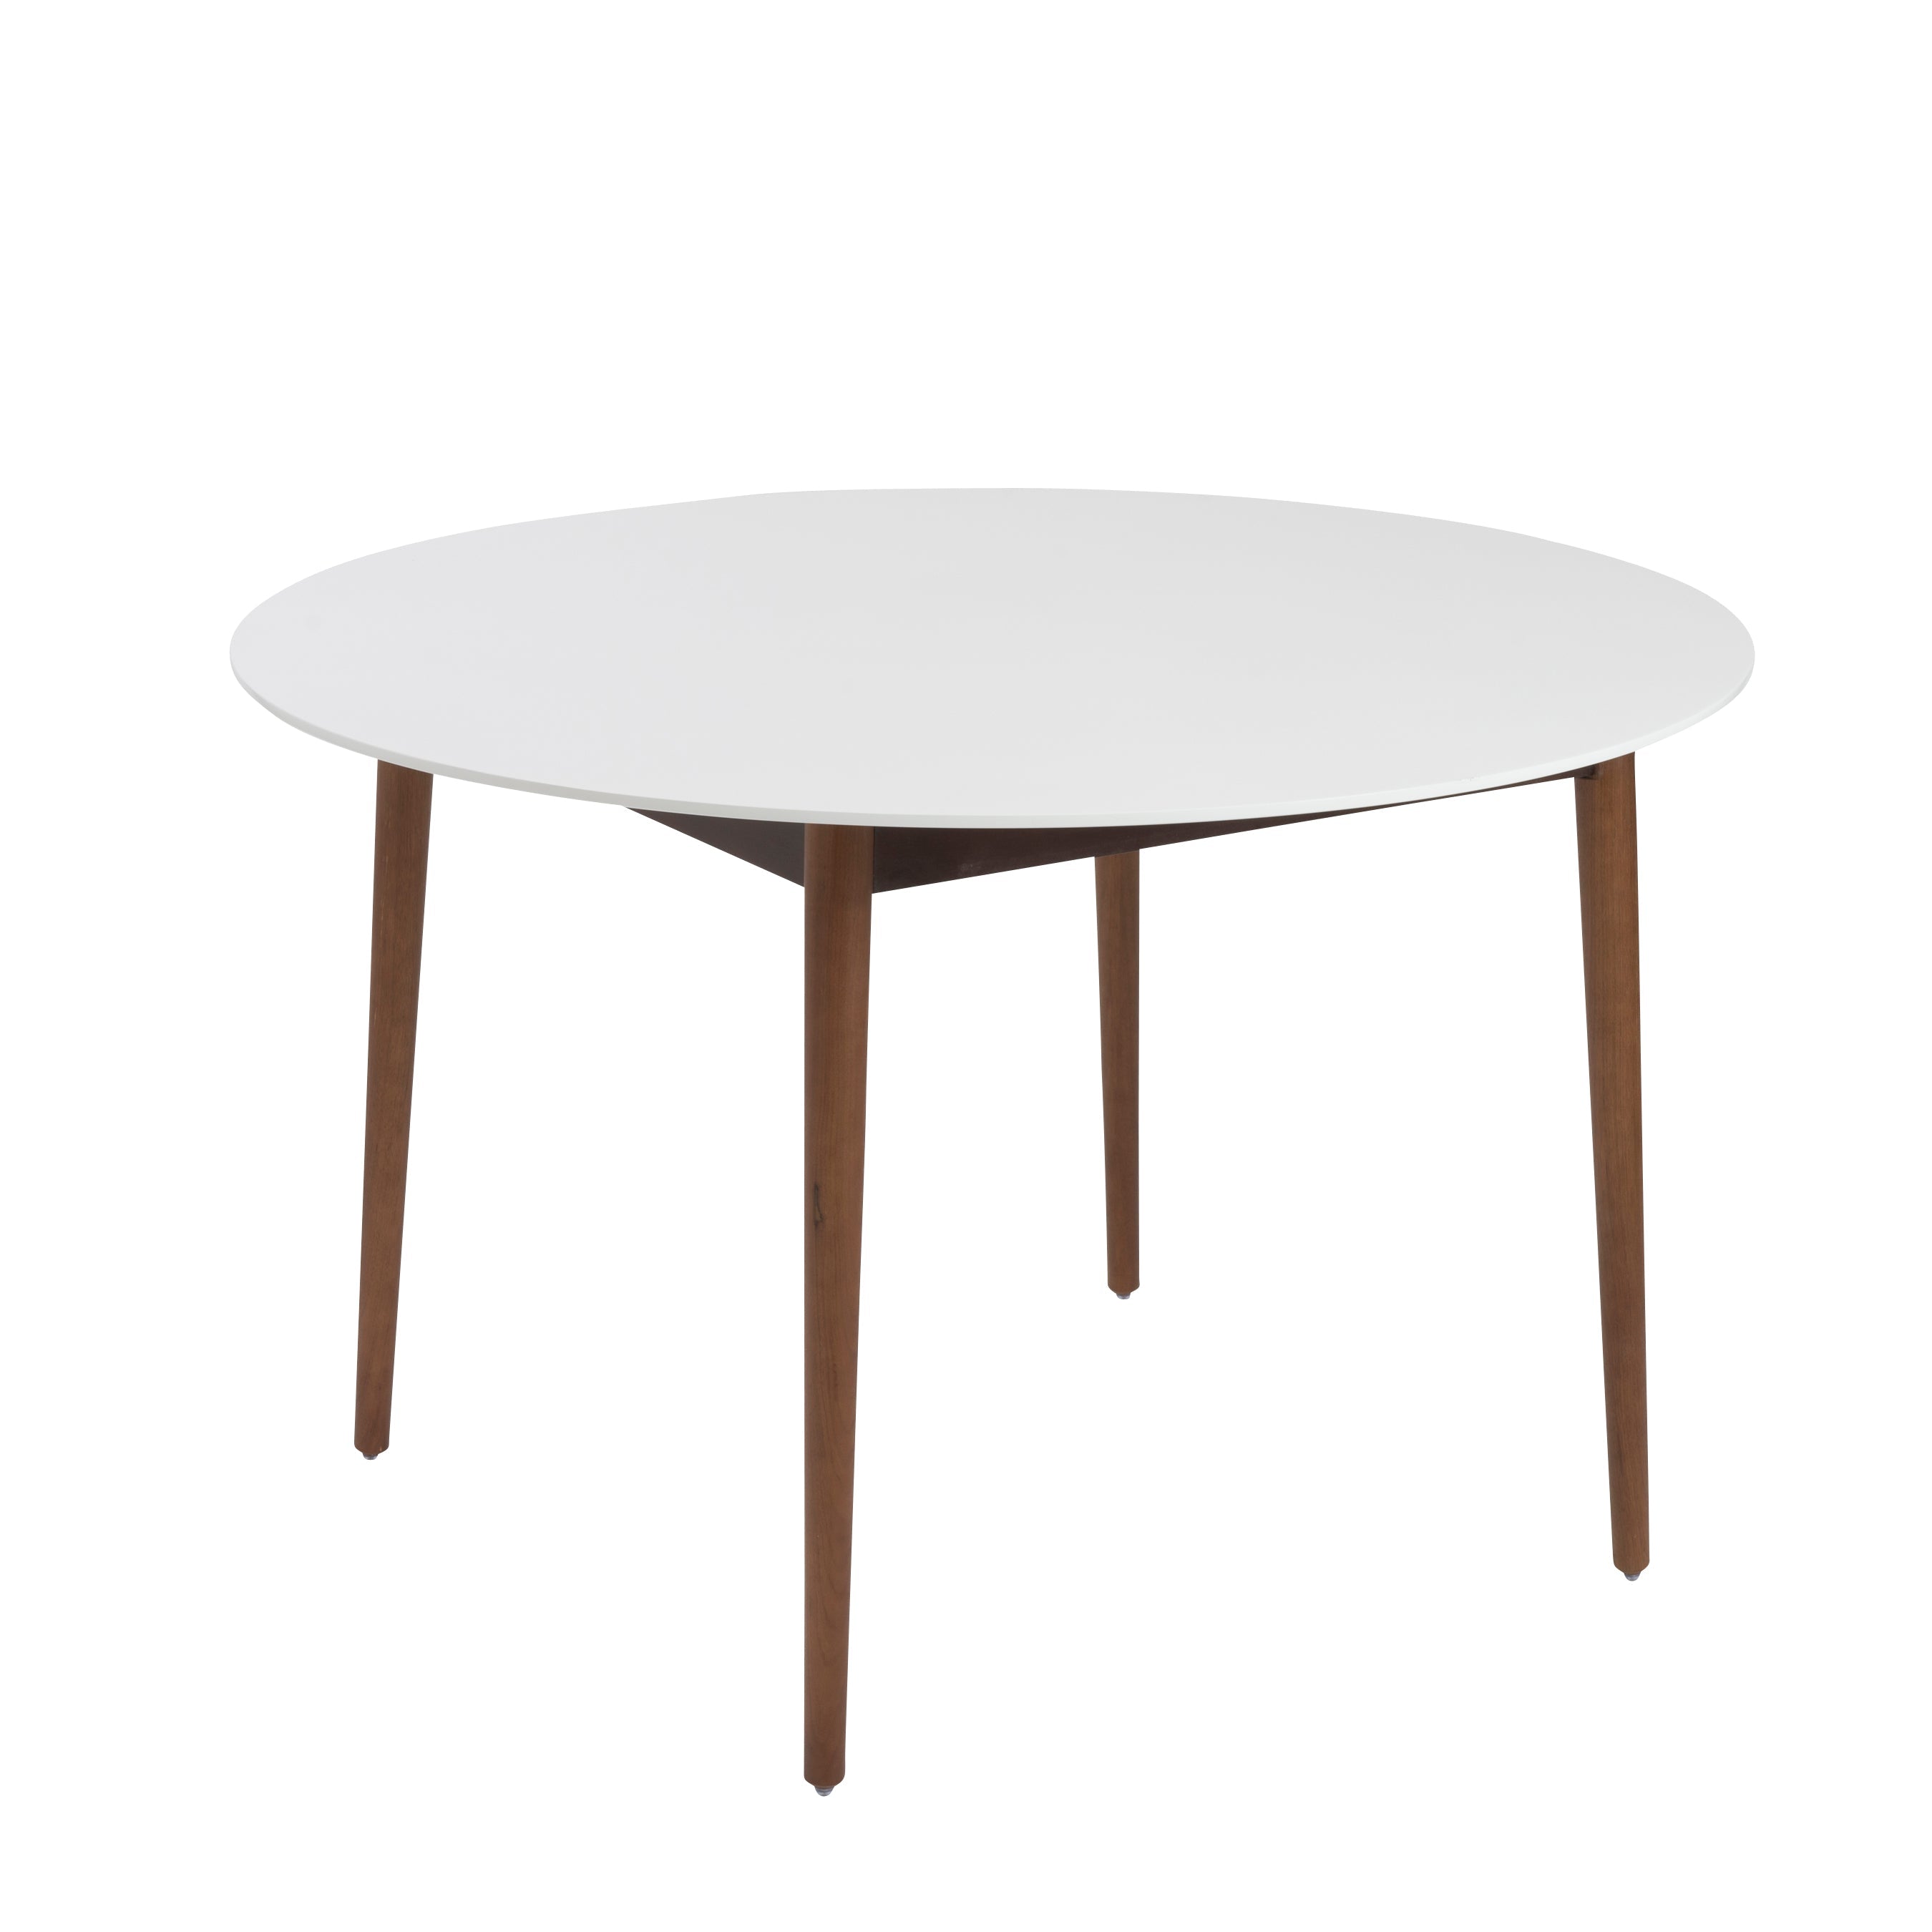 Manon Round Dining Table - What A Room